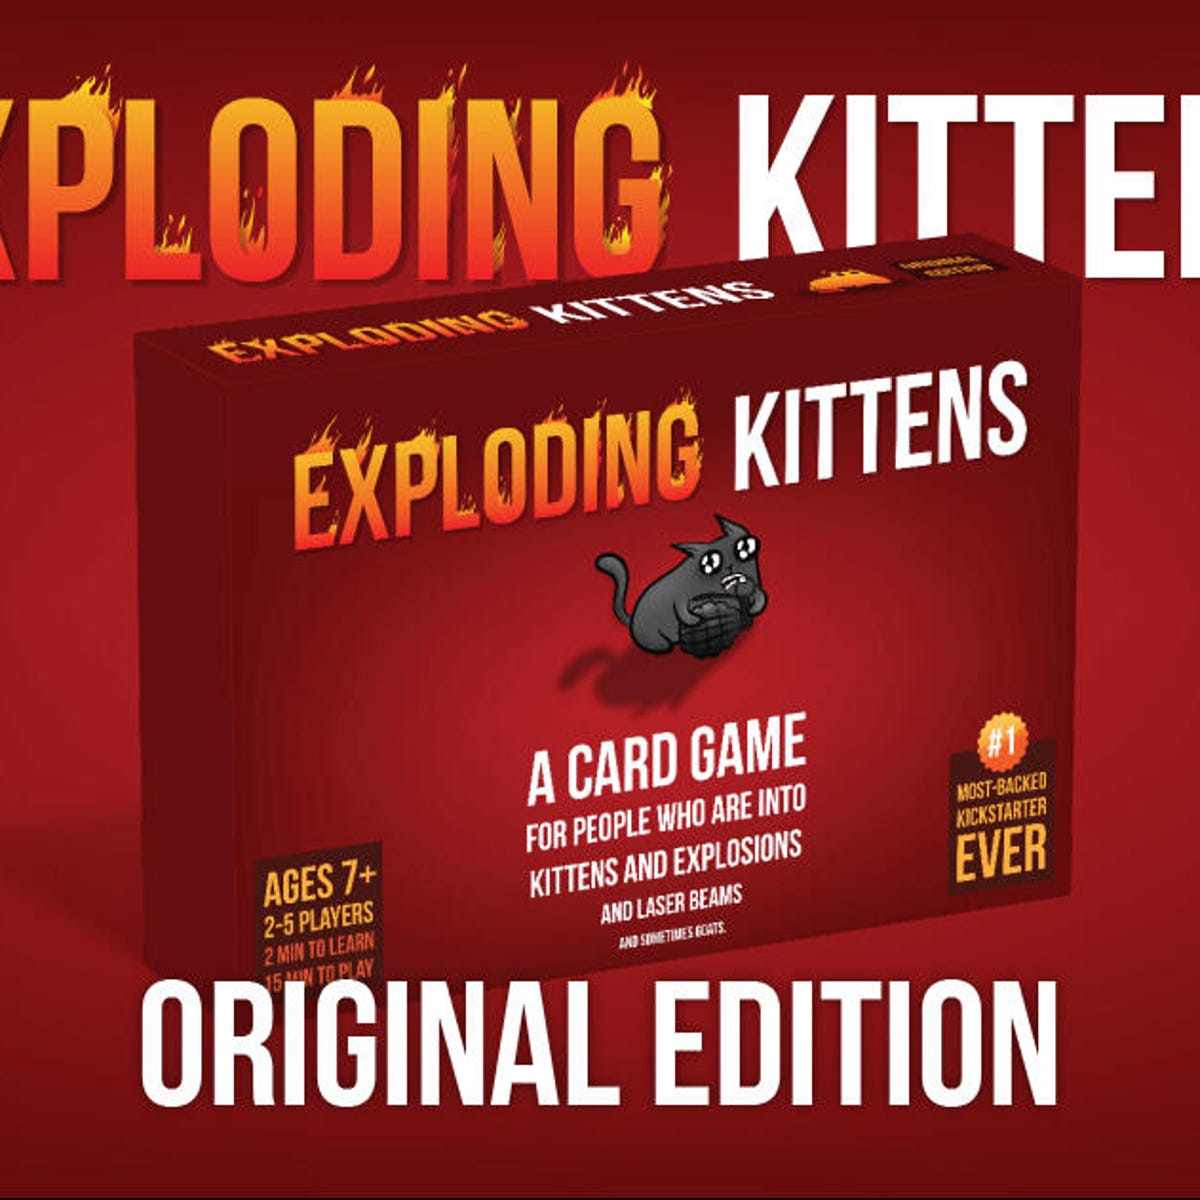 Save up to 40% on quirky tabletop games at Exploding Kittens - CNET